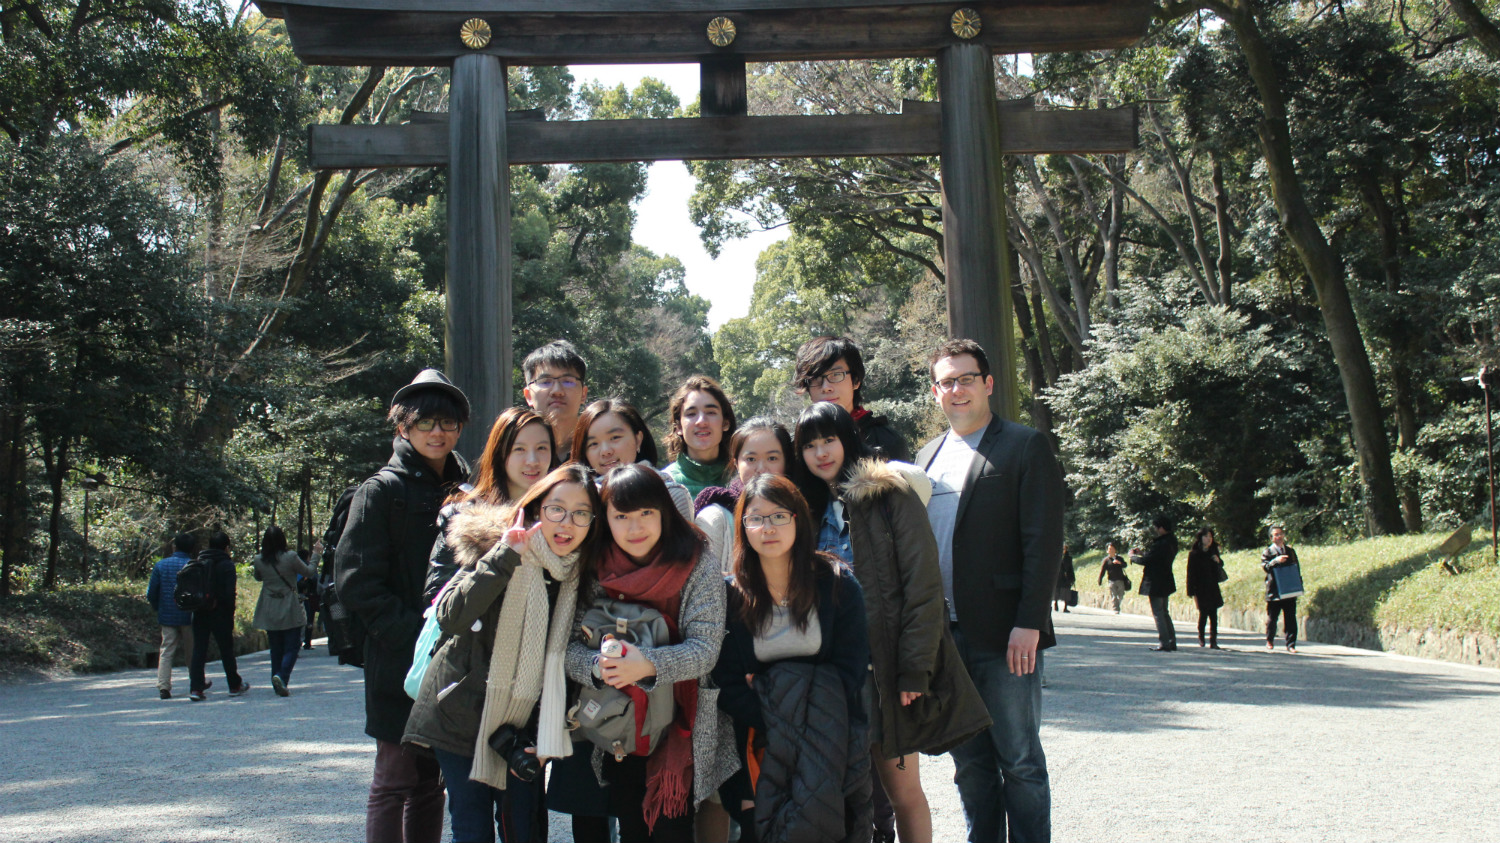 Students from the CIE Debate Union gained a lot of precious experience in public speaking from the trip to Tokyo.